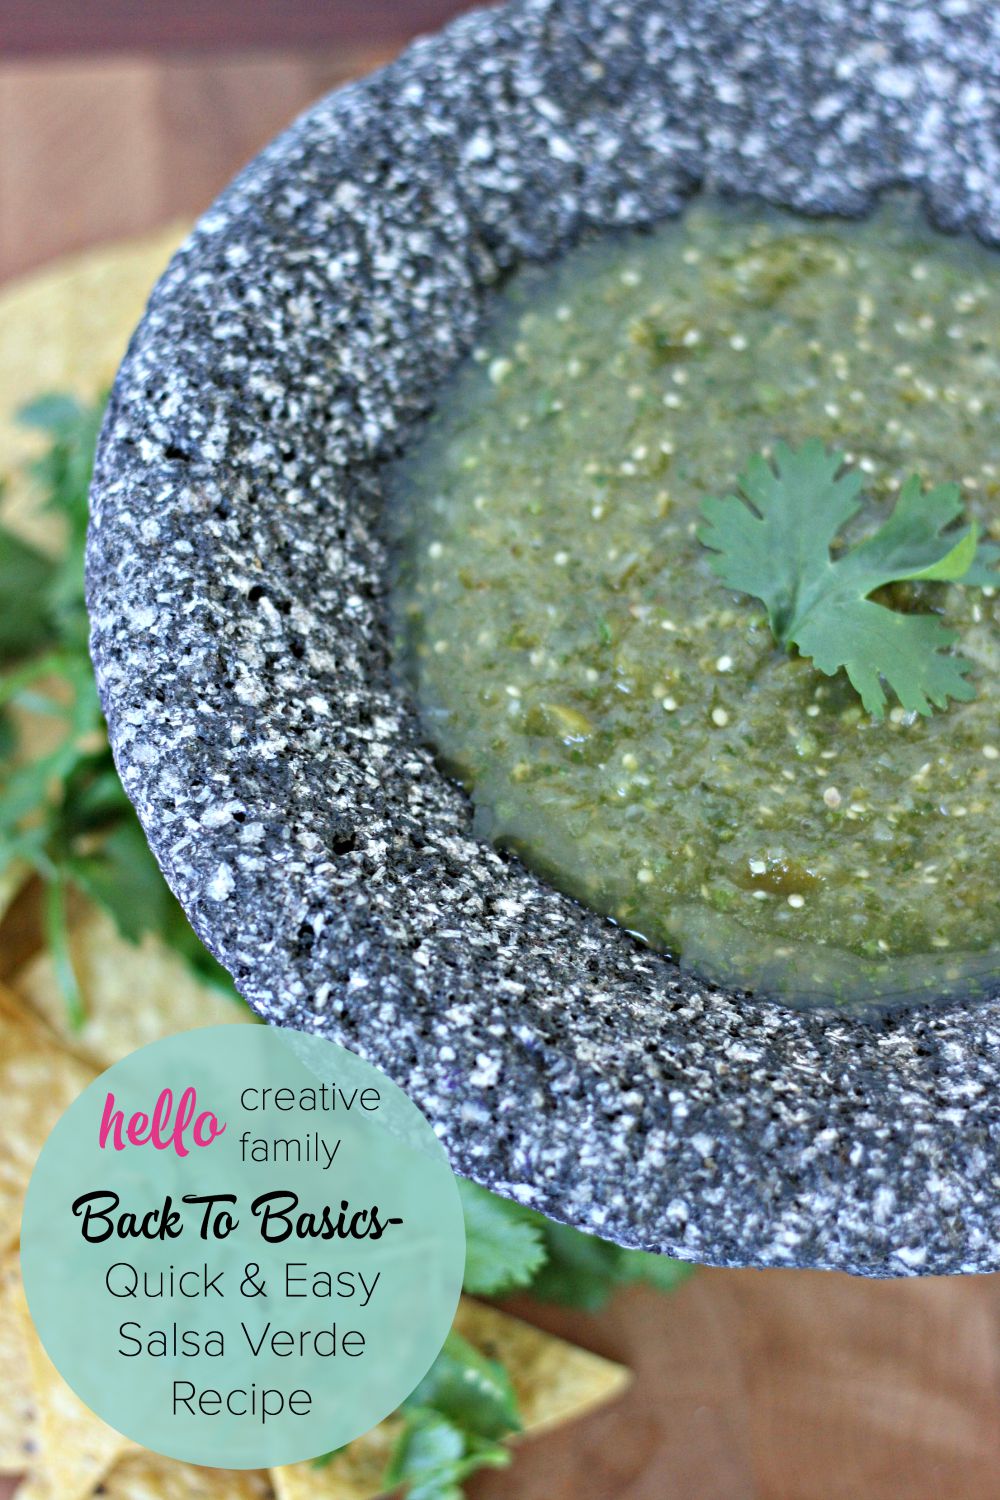 Back To Basics Quick and Easy Salsa Verde Recipe from Hello Creative Family